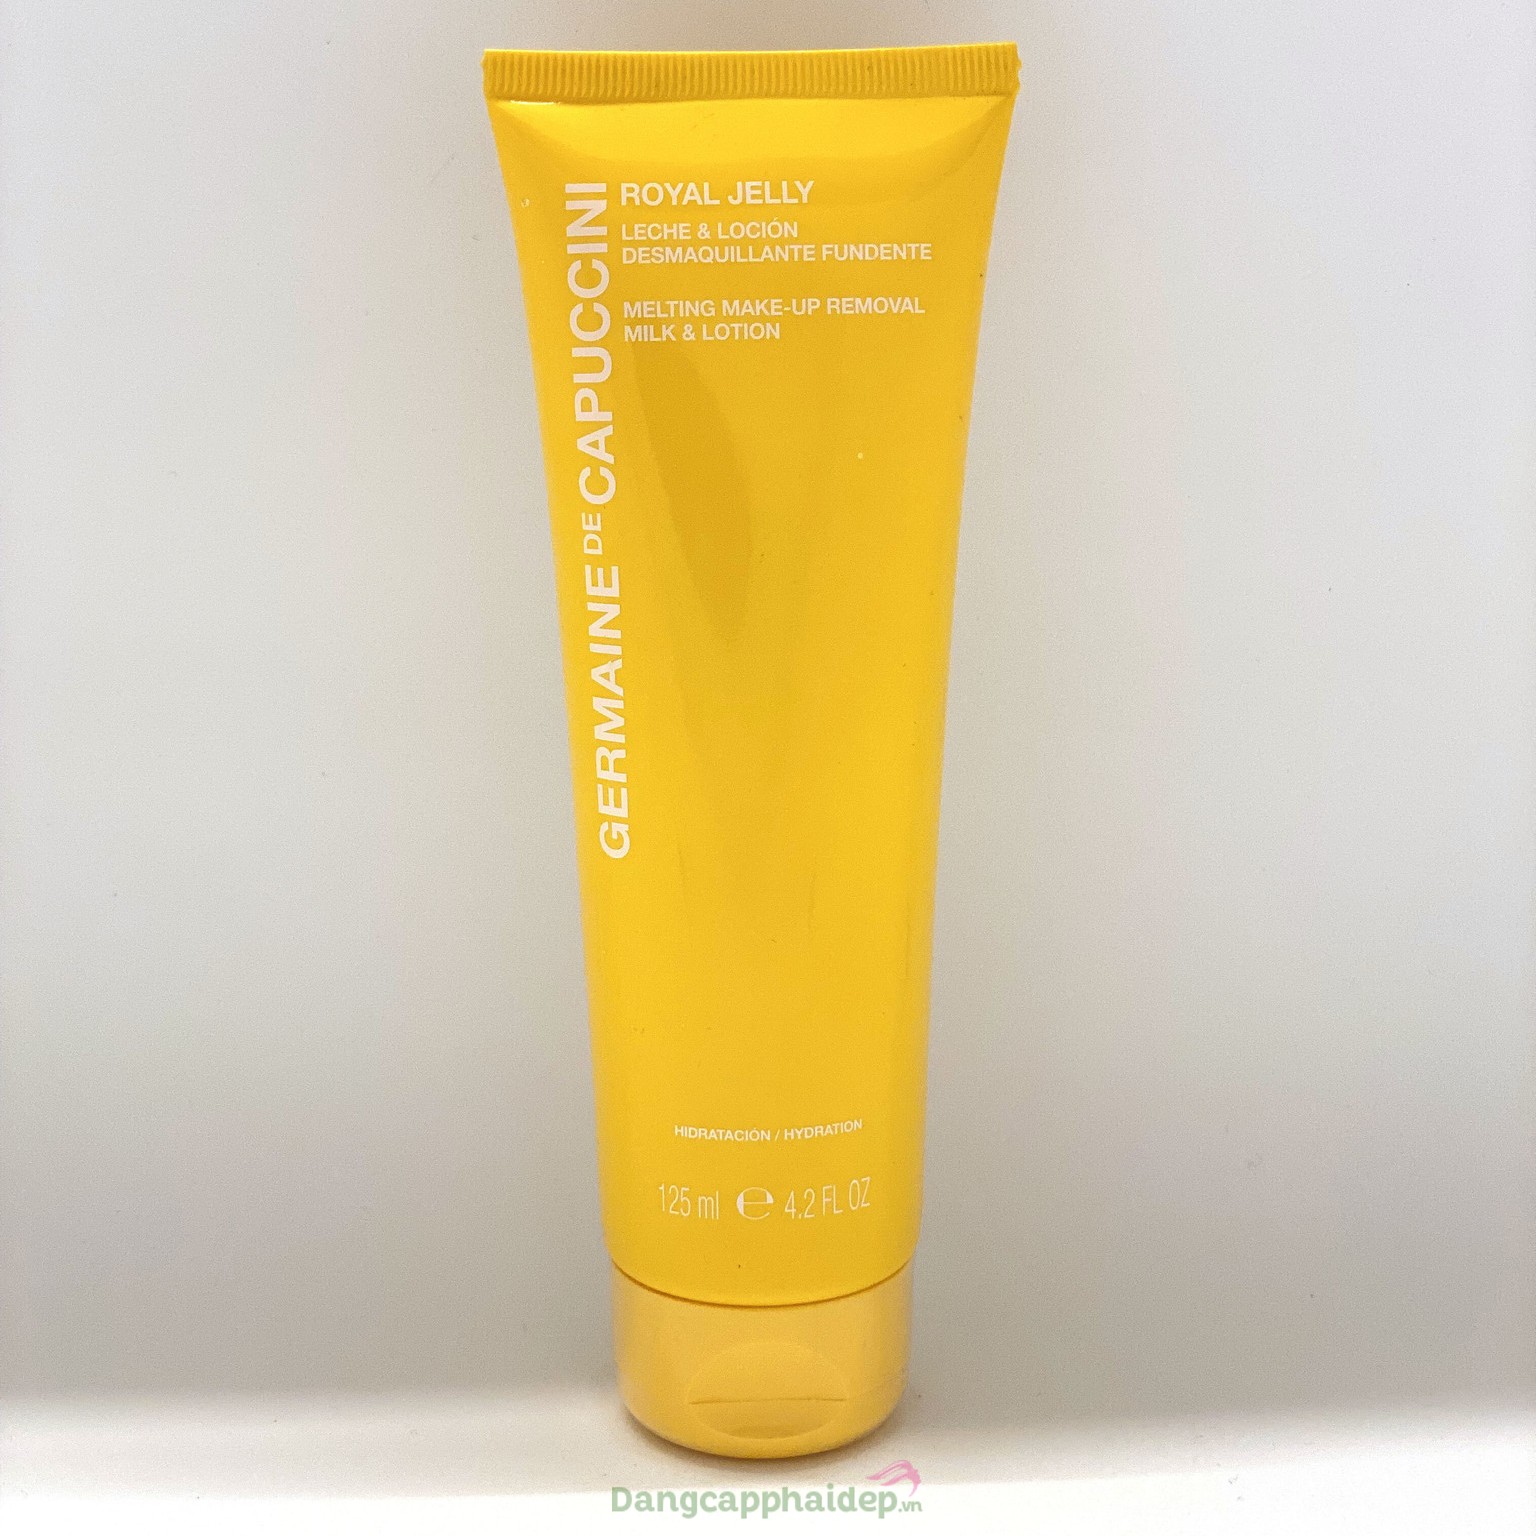 Germaine De Capuccini Melting Make-Up Removal Milk Lotion